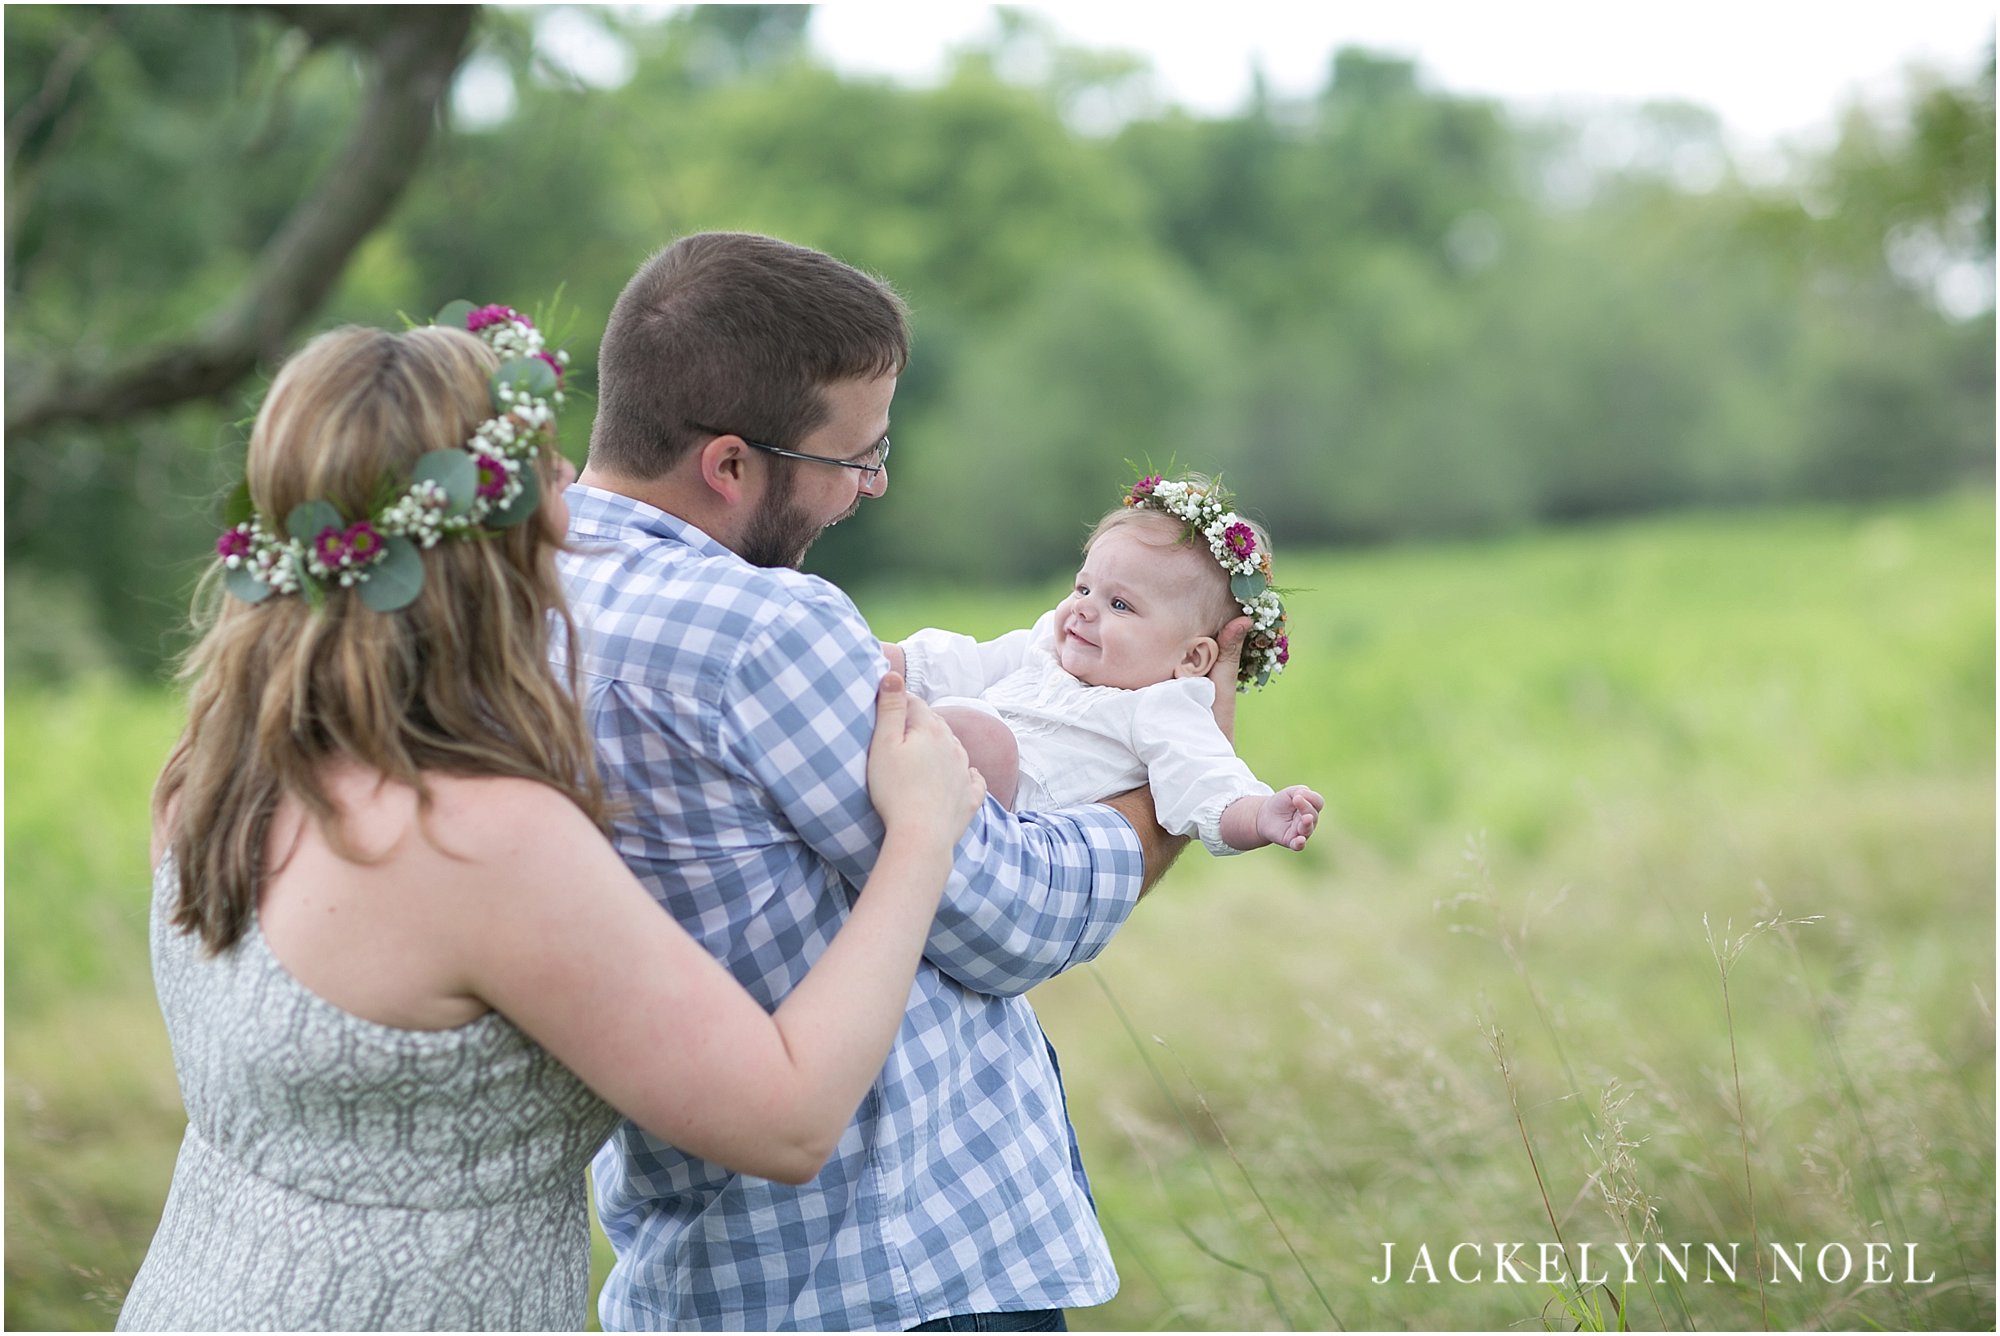 Piper 6 Months Old by Jackelynn Noel Photography